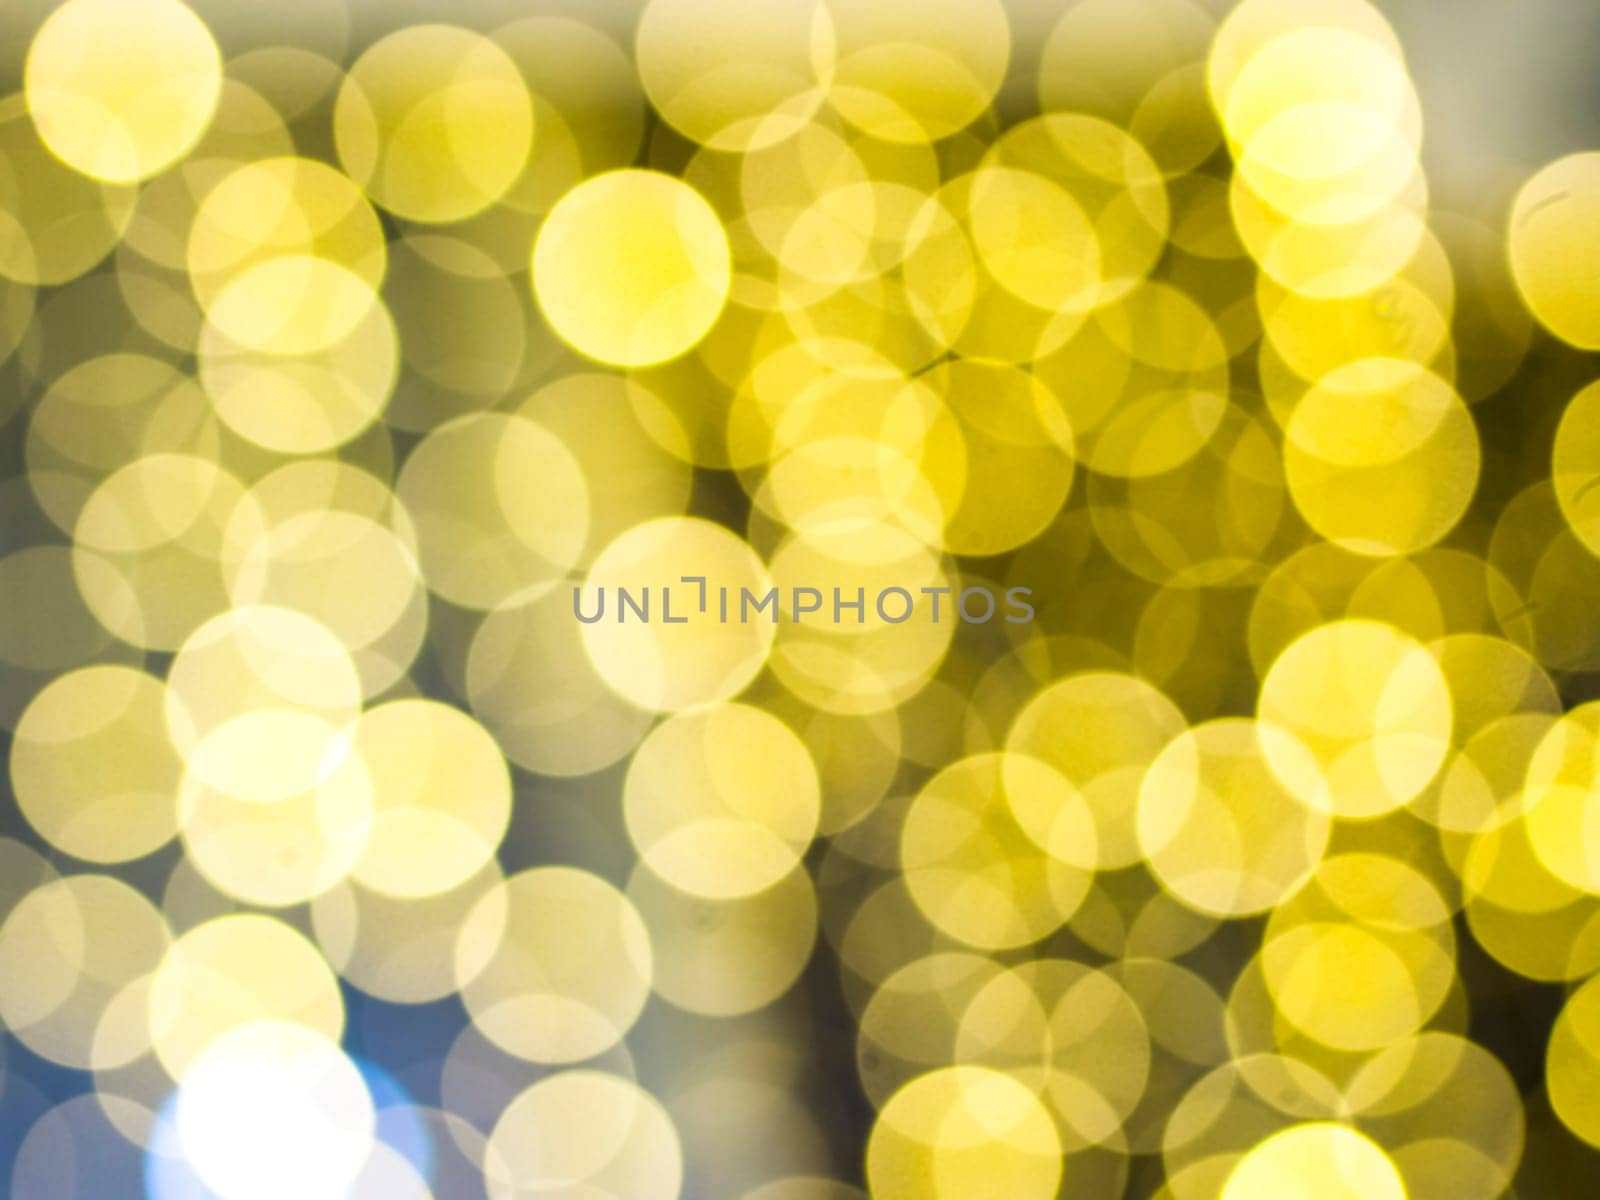 gold abstract background with bokeh defocused lights. Soft blurred yellow and gold bokeh background, Abstract lights. Defocusing lens